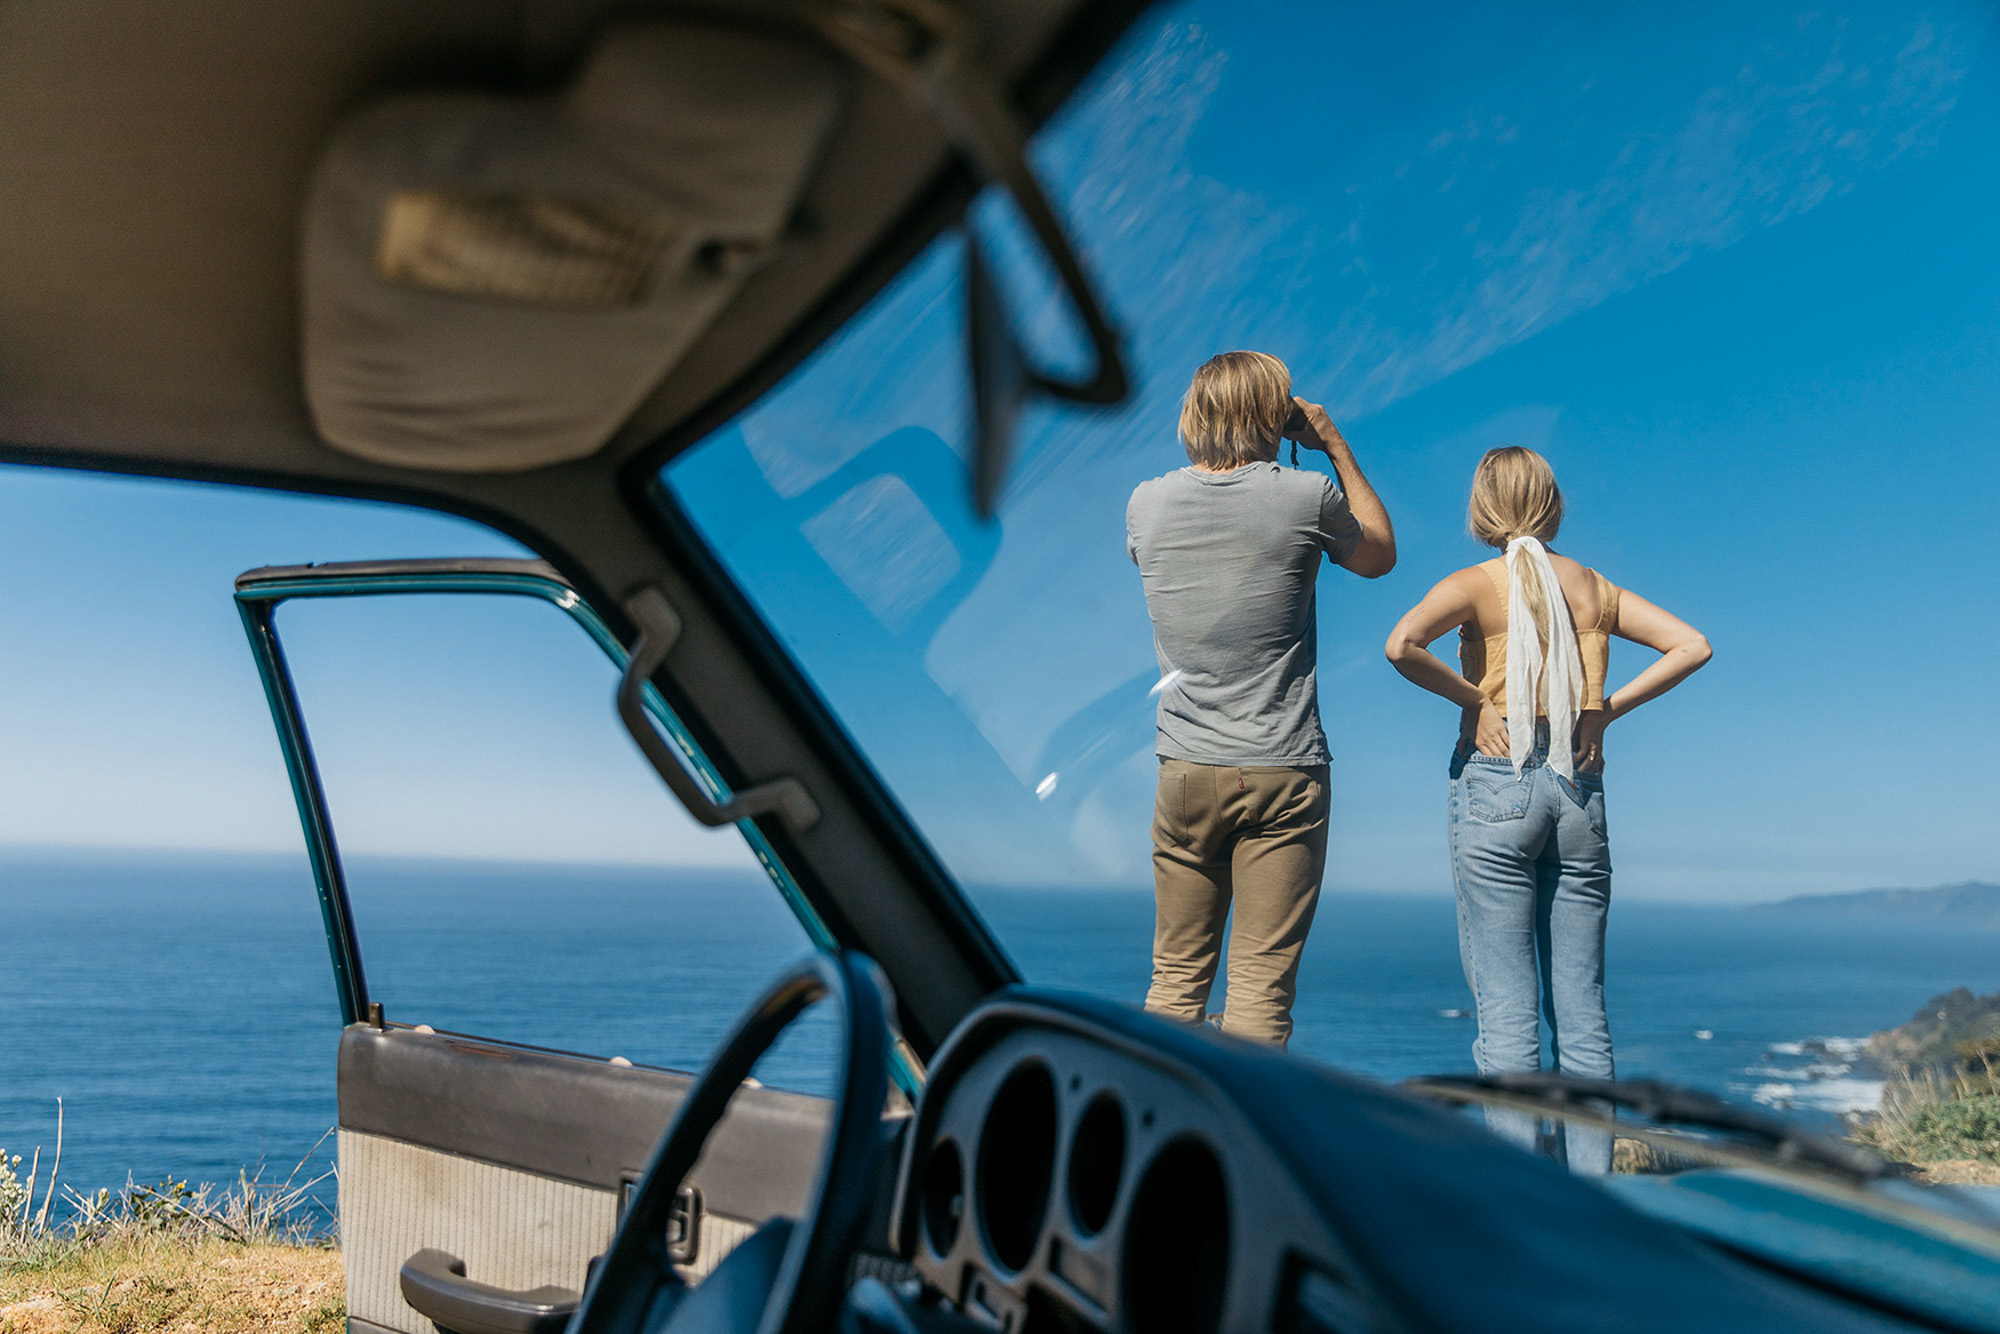 Commercial lifestyle photographer Jenavieve Bel Air's test shoot of a road trip along the coast of Big Sur, California.